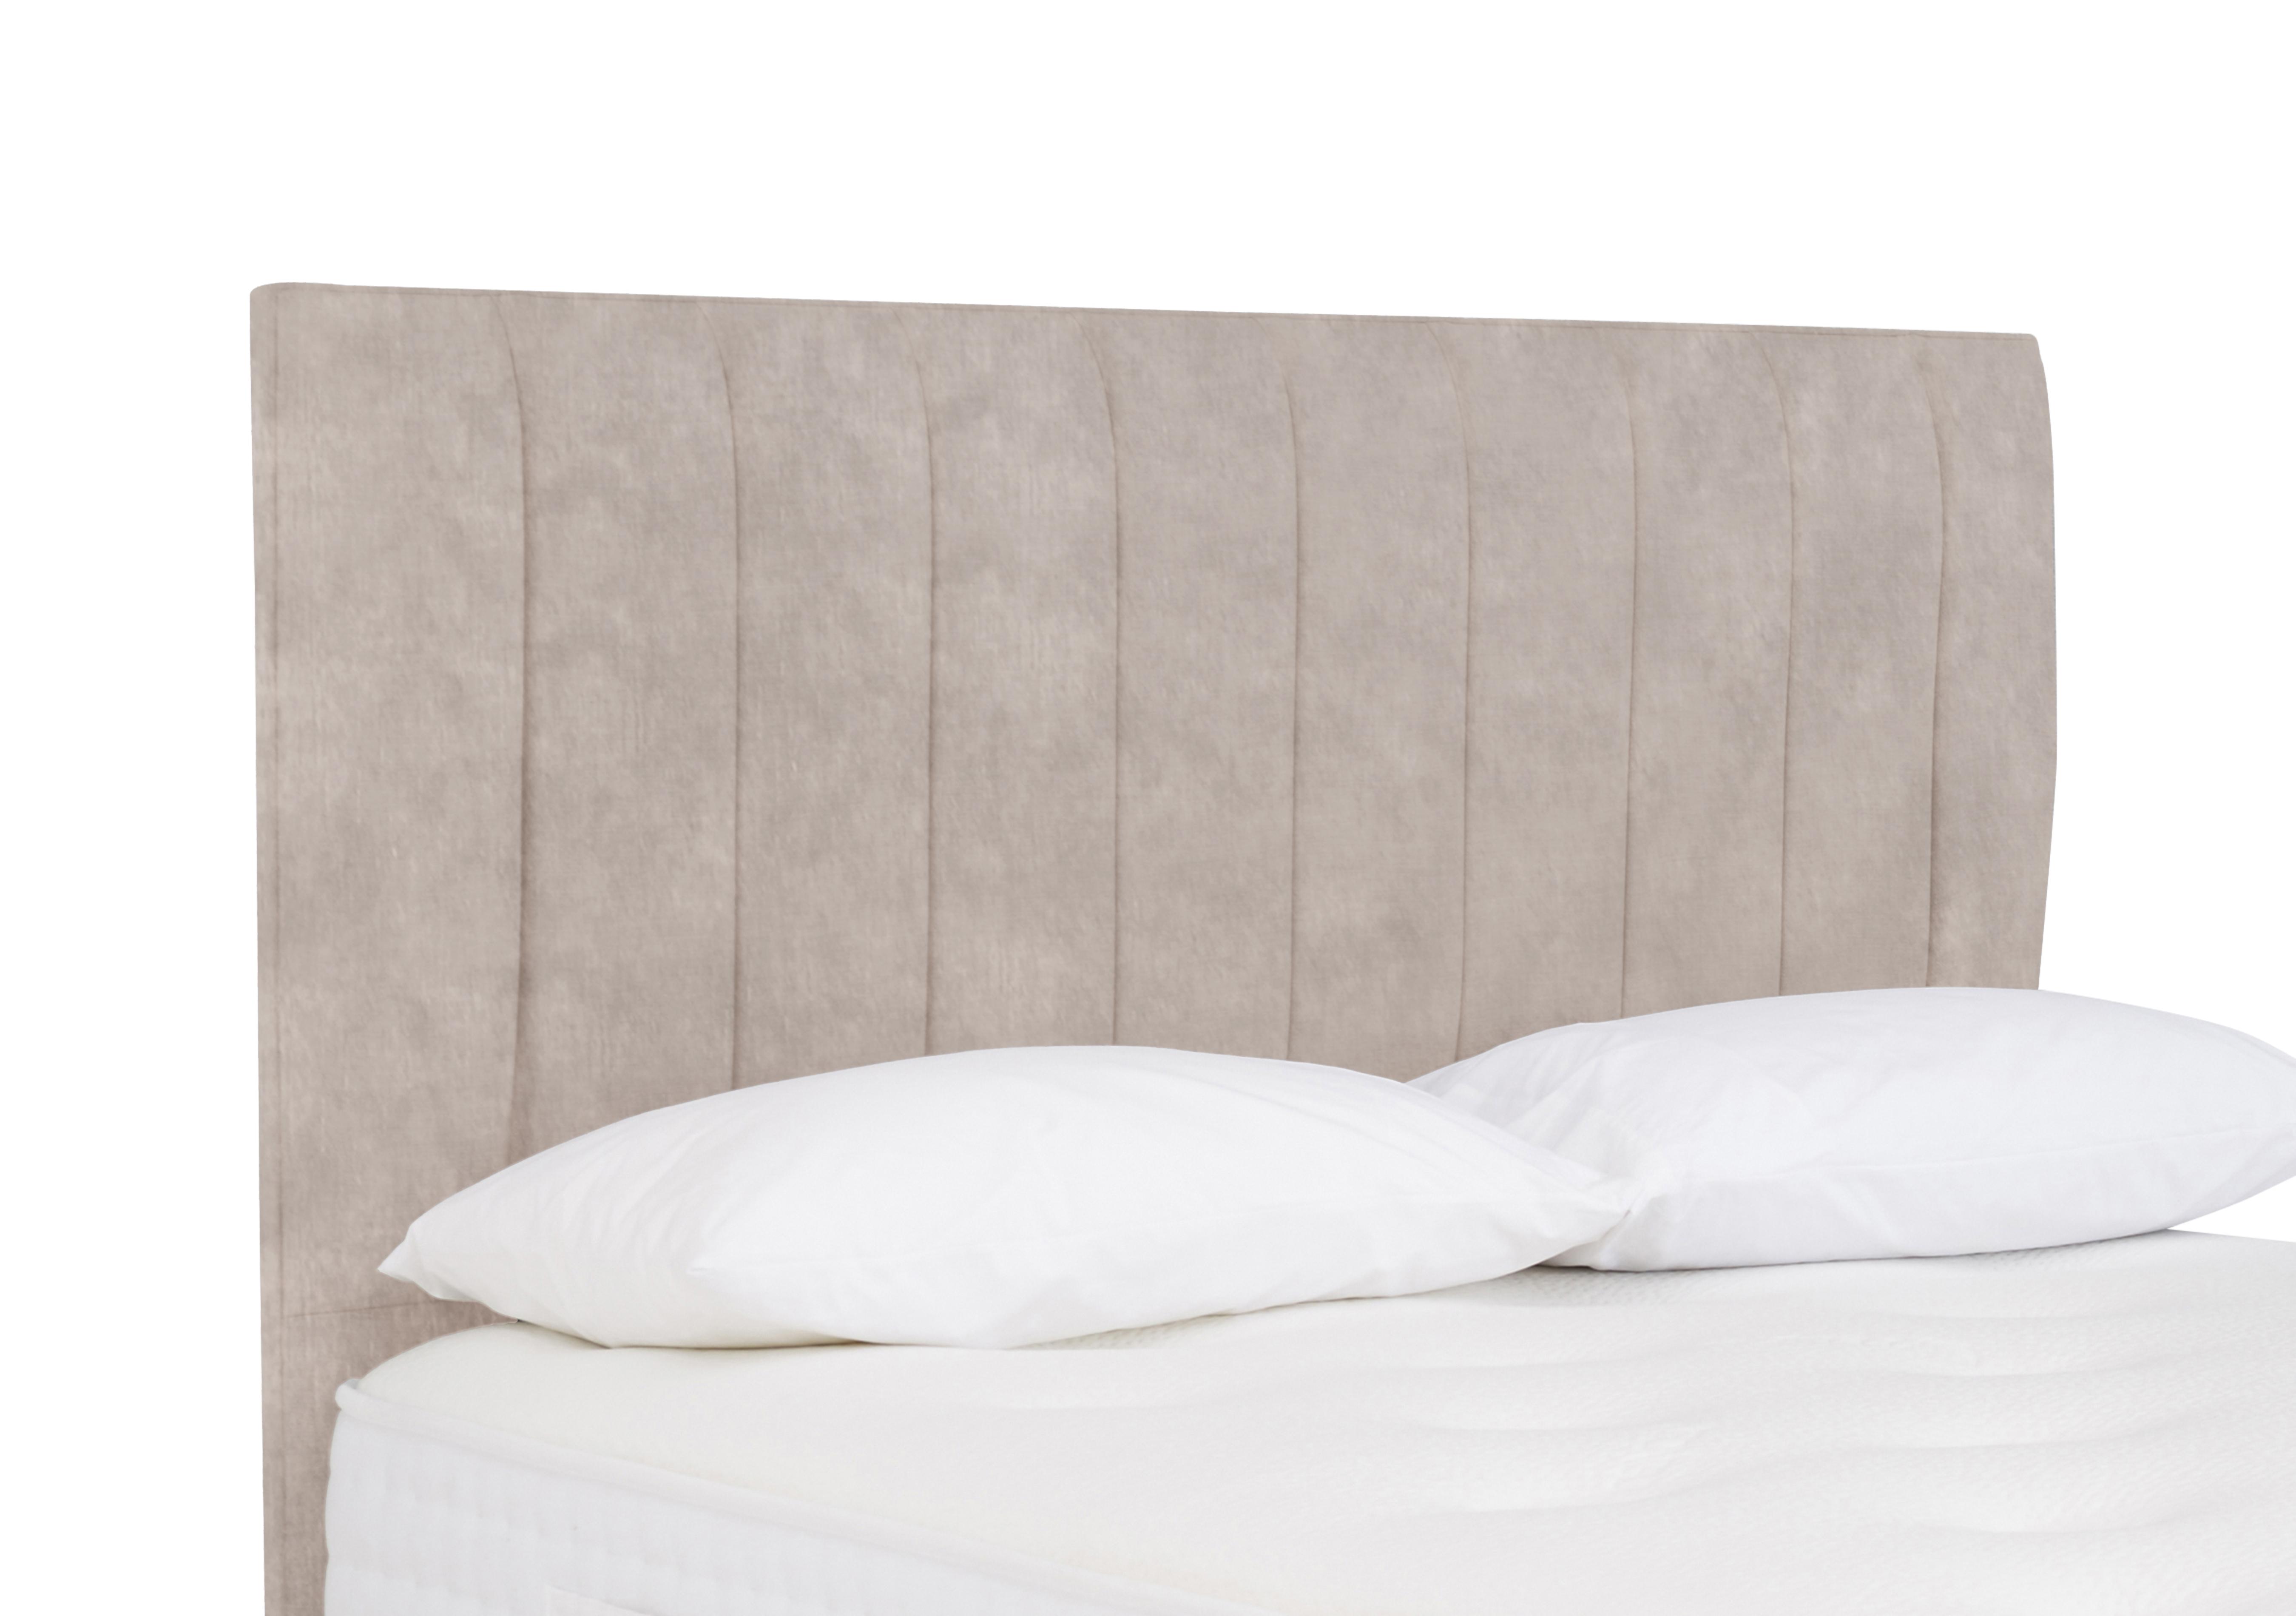 Tracks Floor Standing Headboard in Lace Ivory on Furniture Village